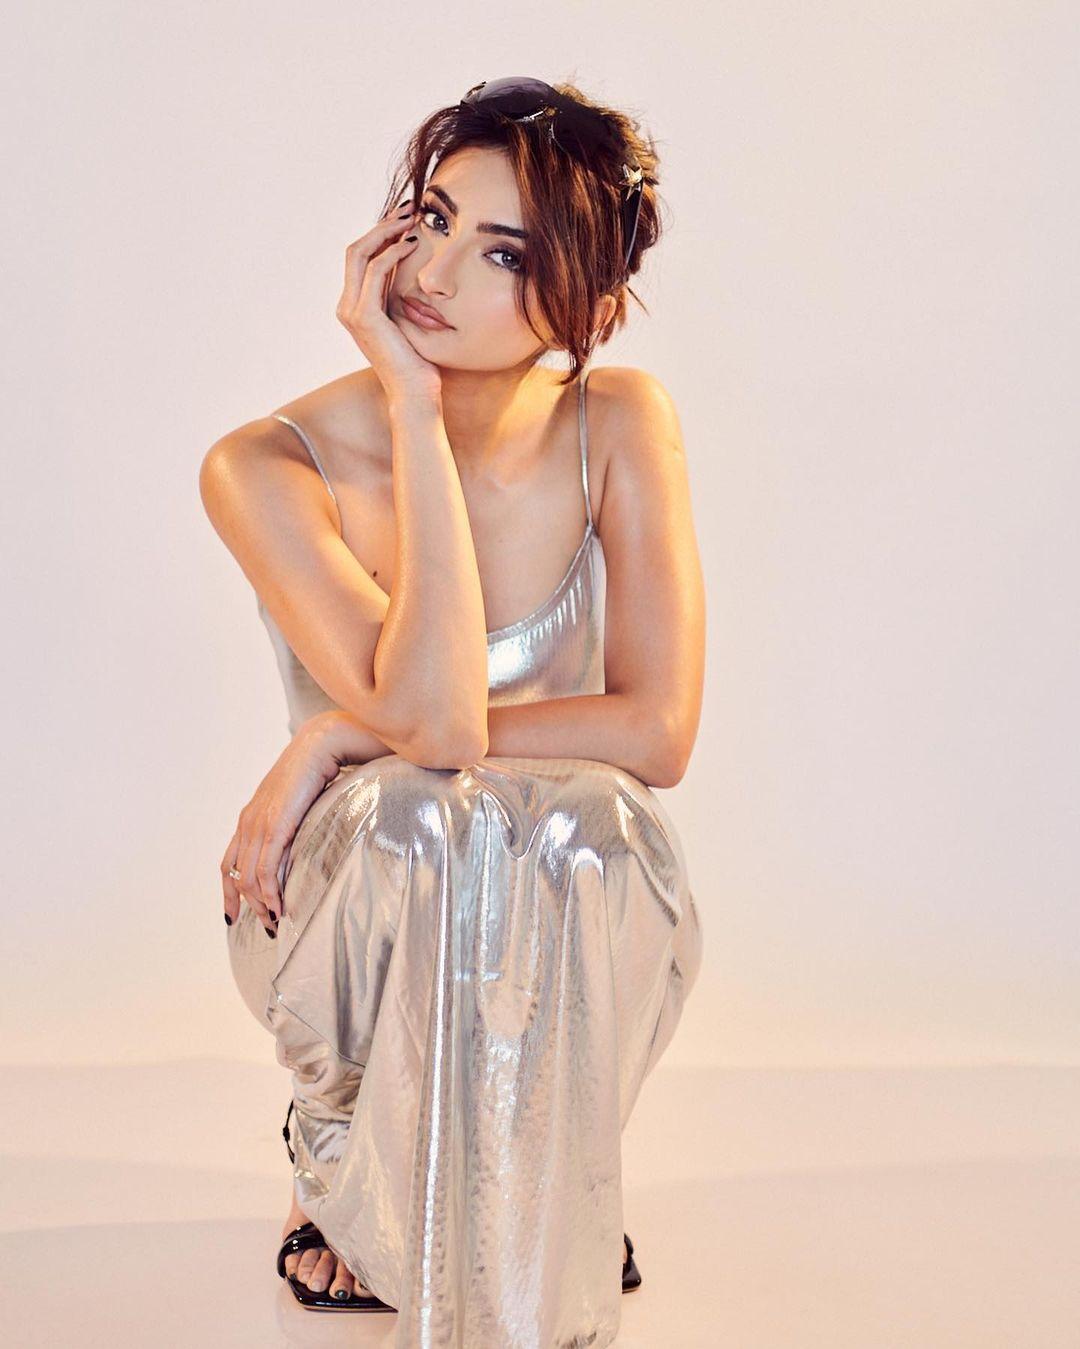 Palak styled this maxi metallic dress with a simple messy bun that gave the ensemble the right amount of flair